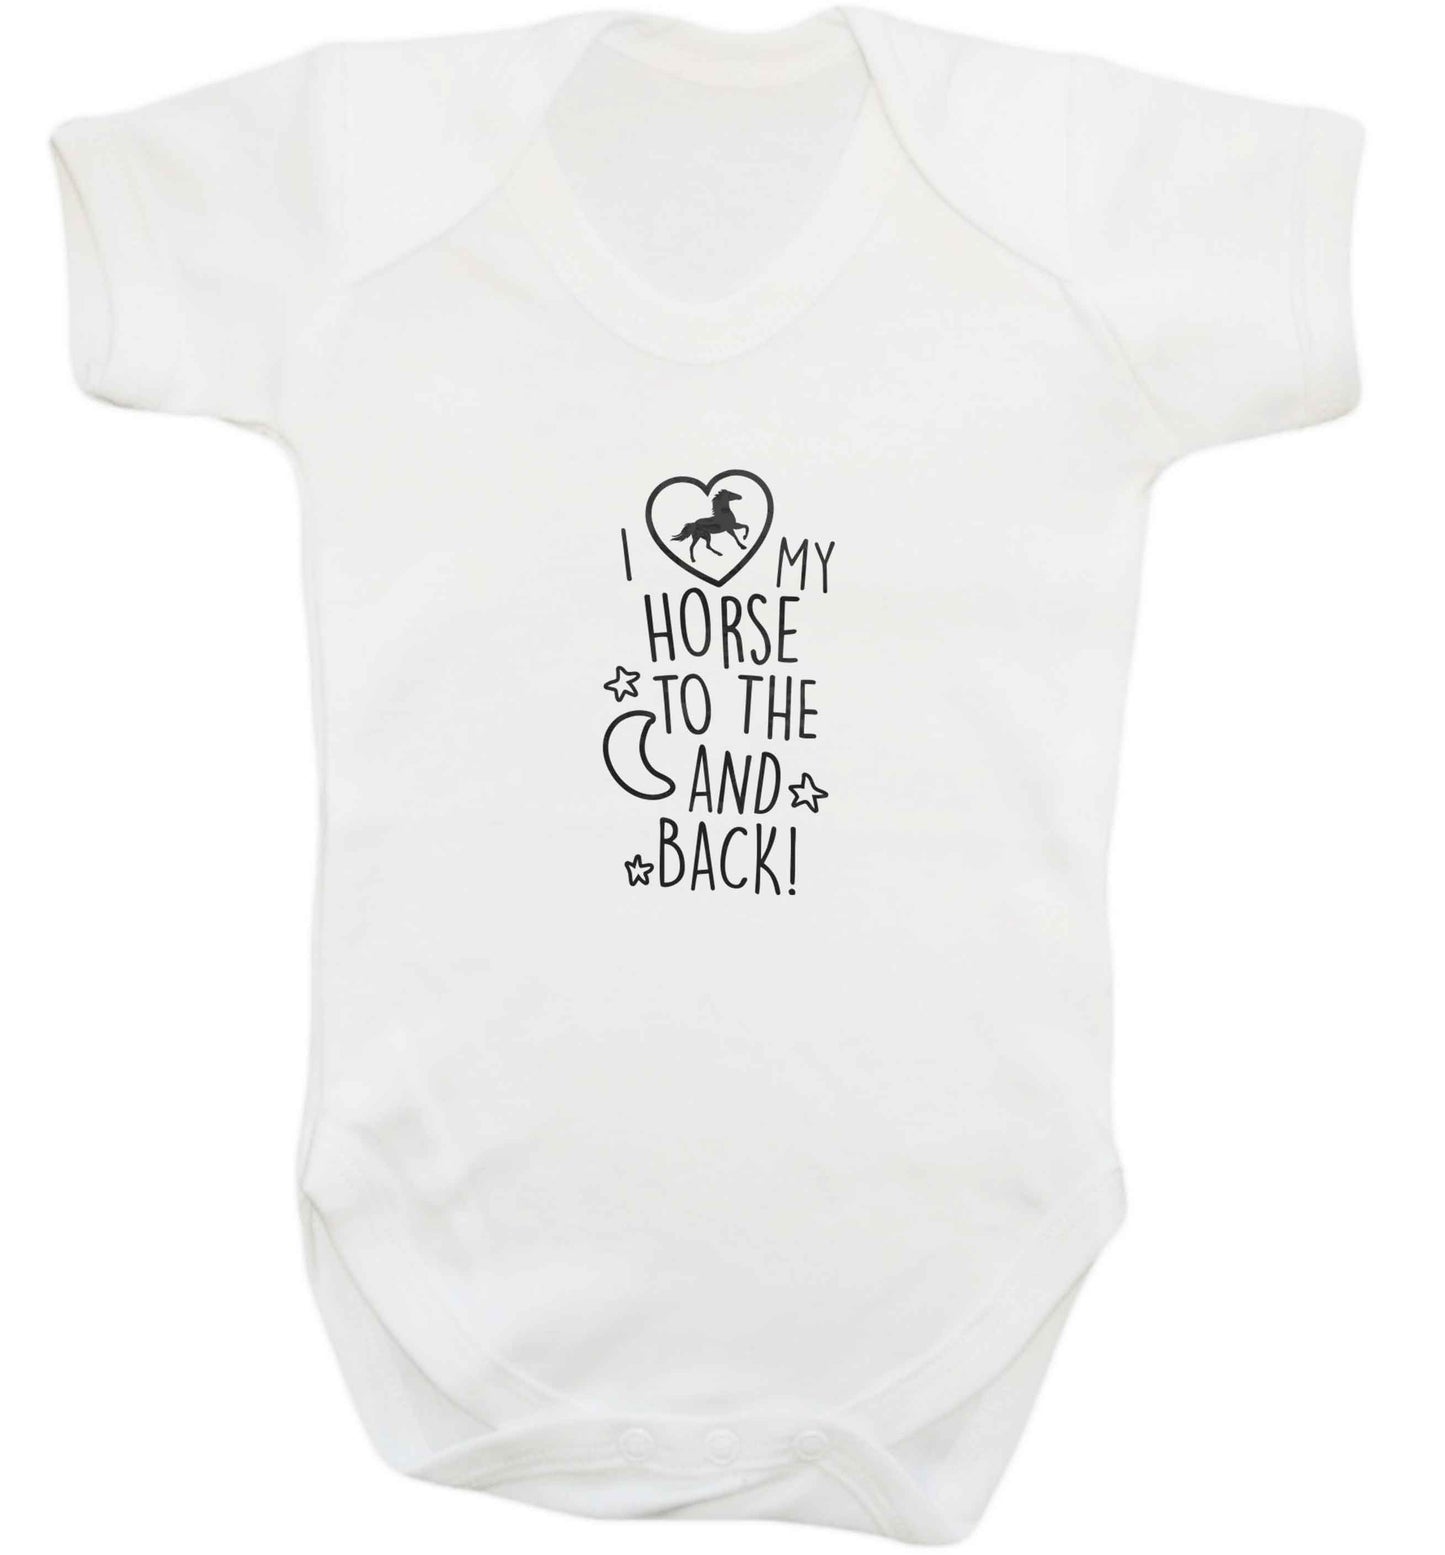 I love my horse to the moon and back baby vest white 18-24 months